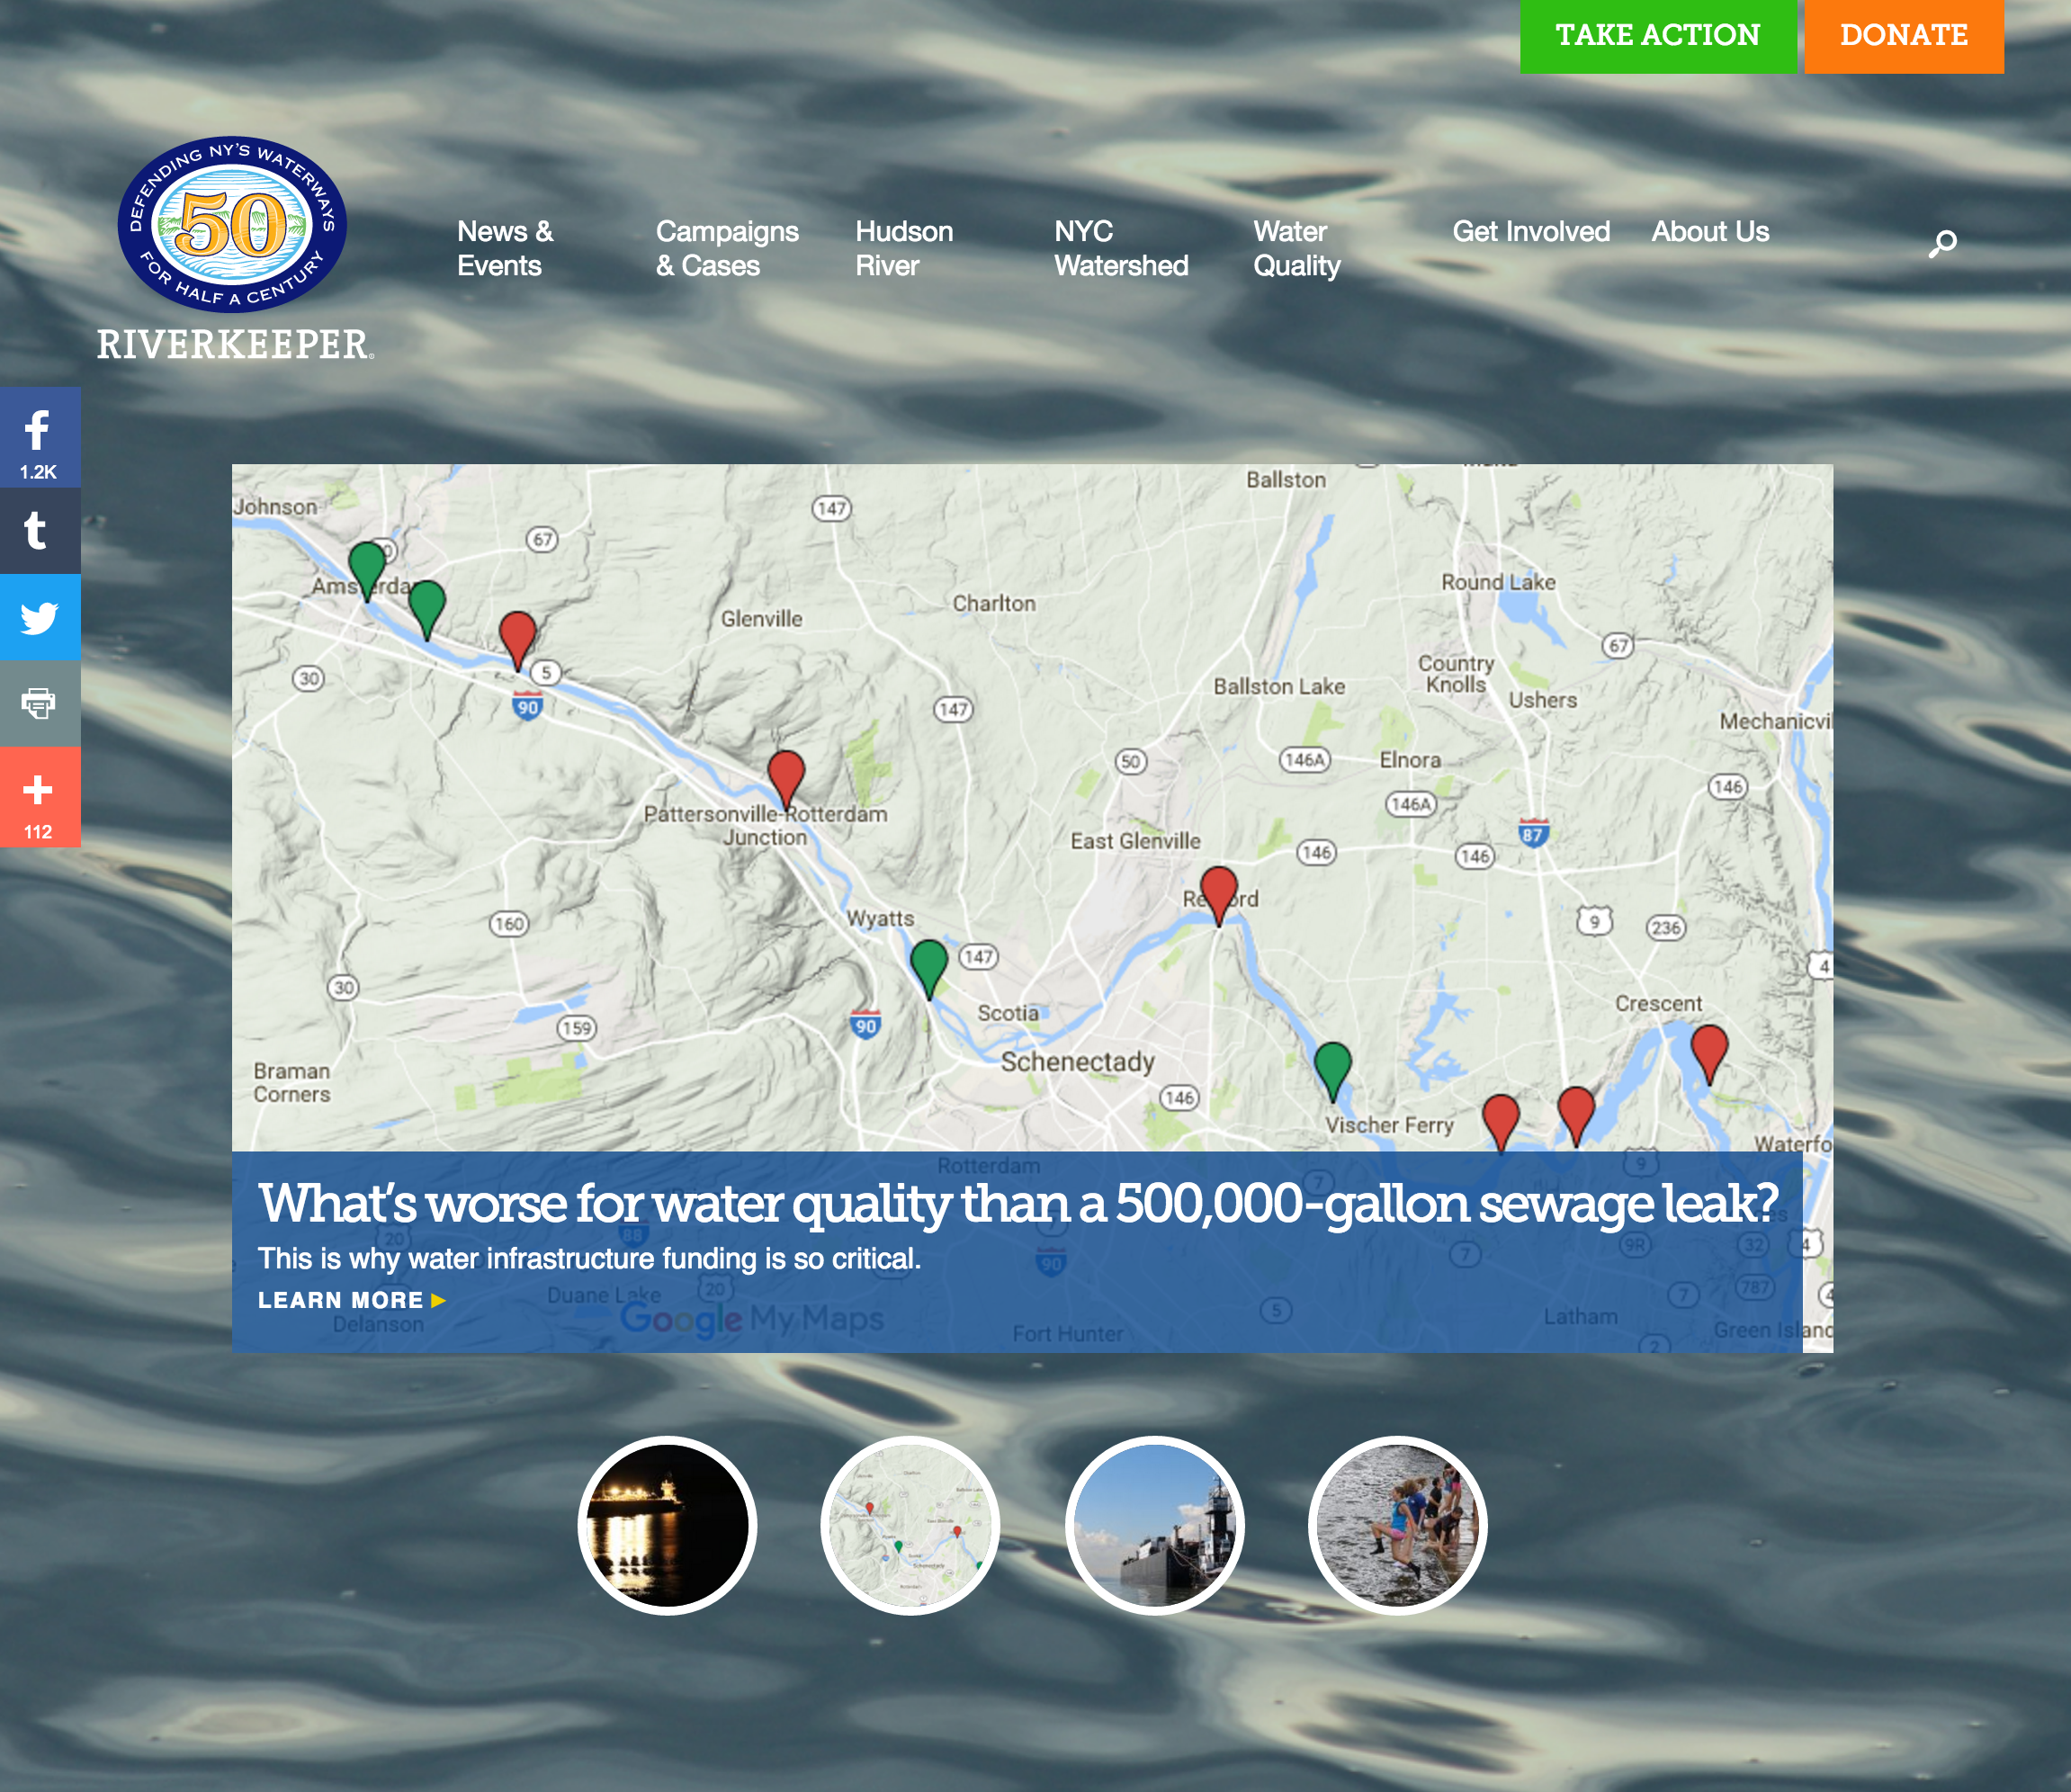 Riverkeeper: Homepage and Mapping